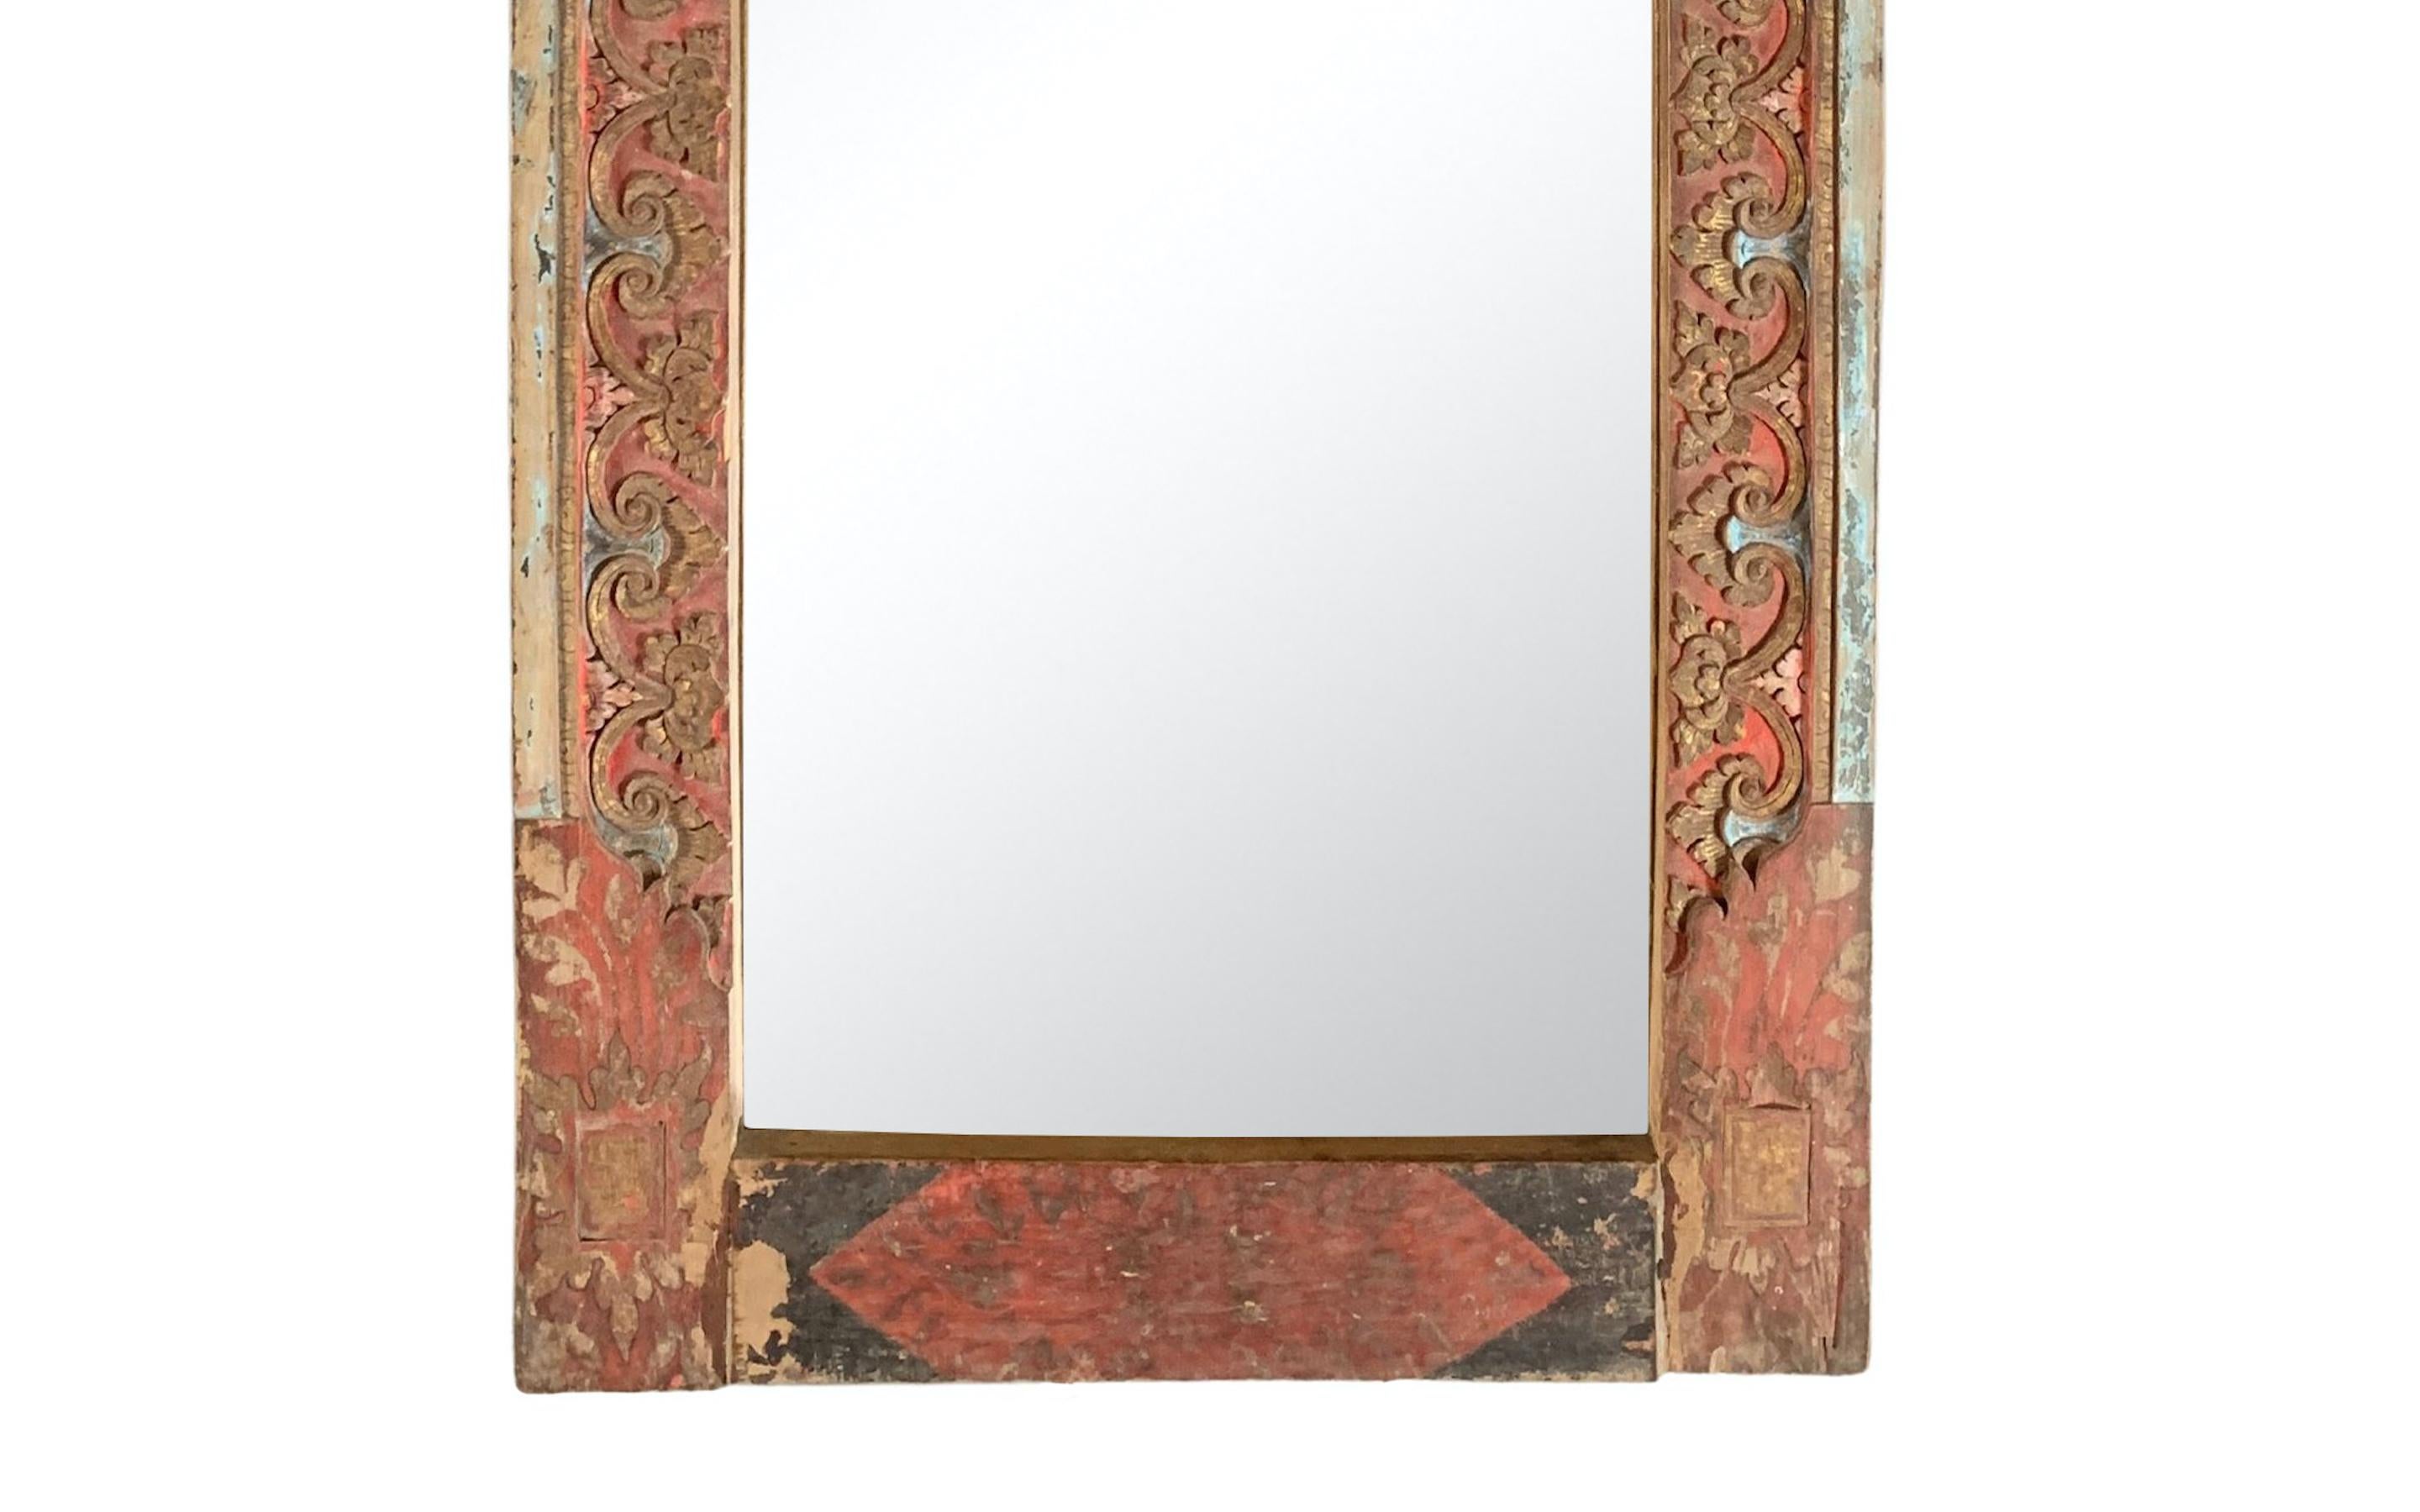 This mirror was crafted on the island of Bali around the mid-20th Century and features wonderful Balinese carved detailing and a red, black & gold polychrome finish. There is a wall hanging wire attached to the back of the mirror.